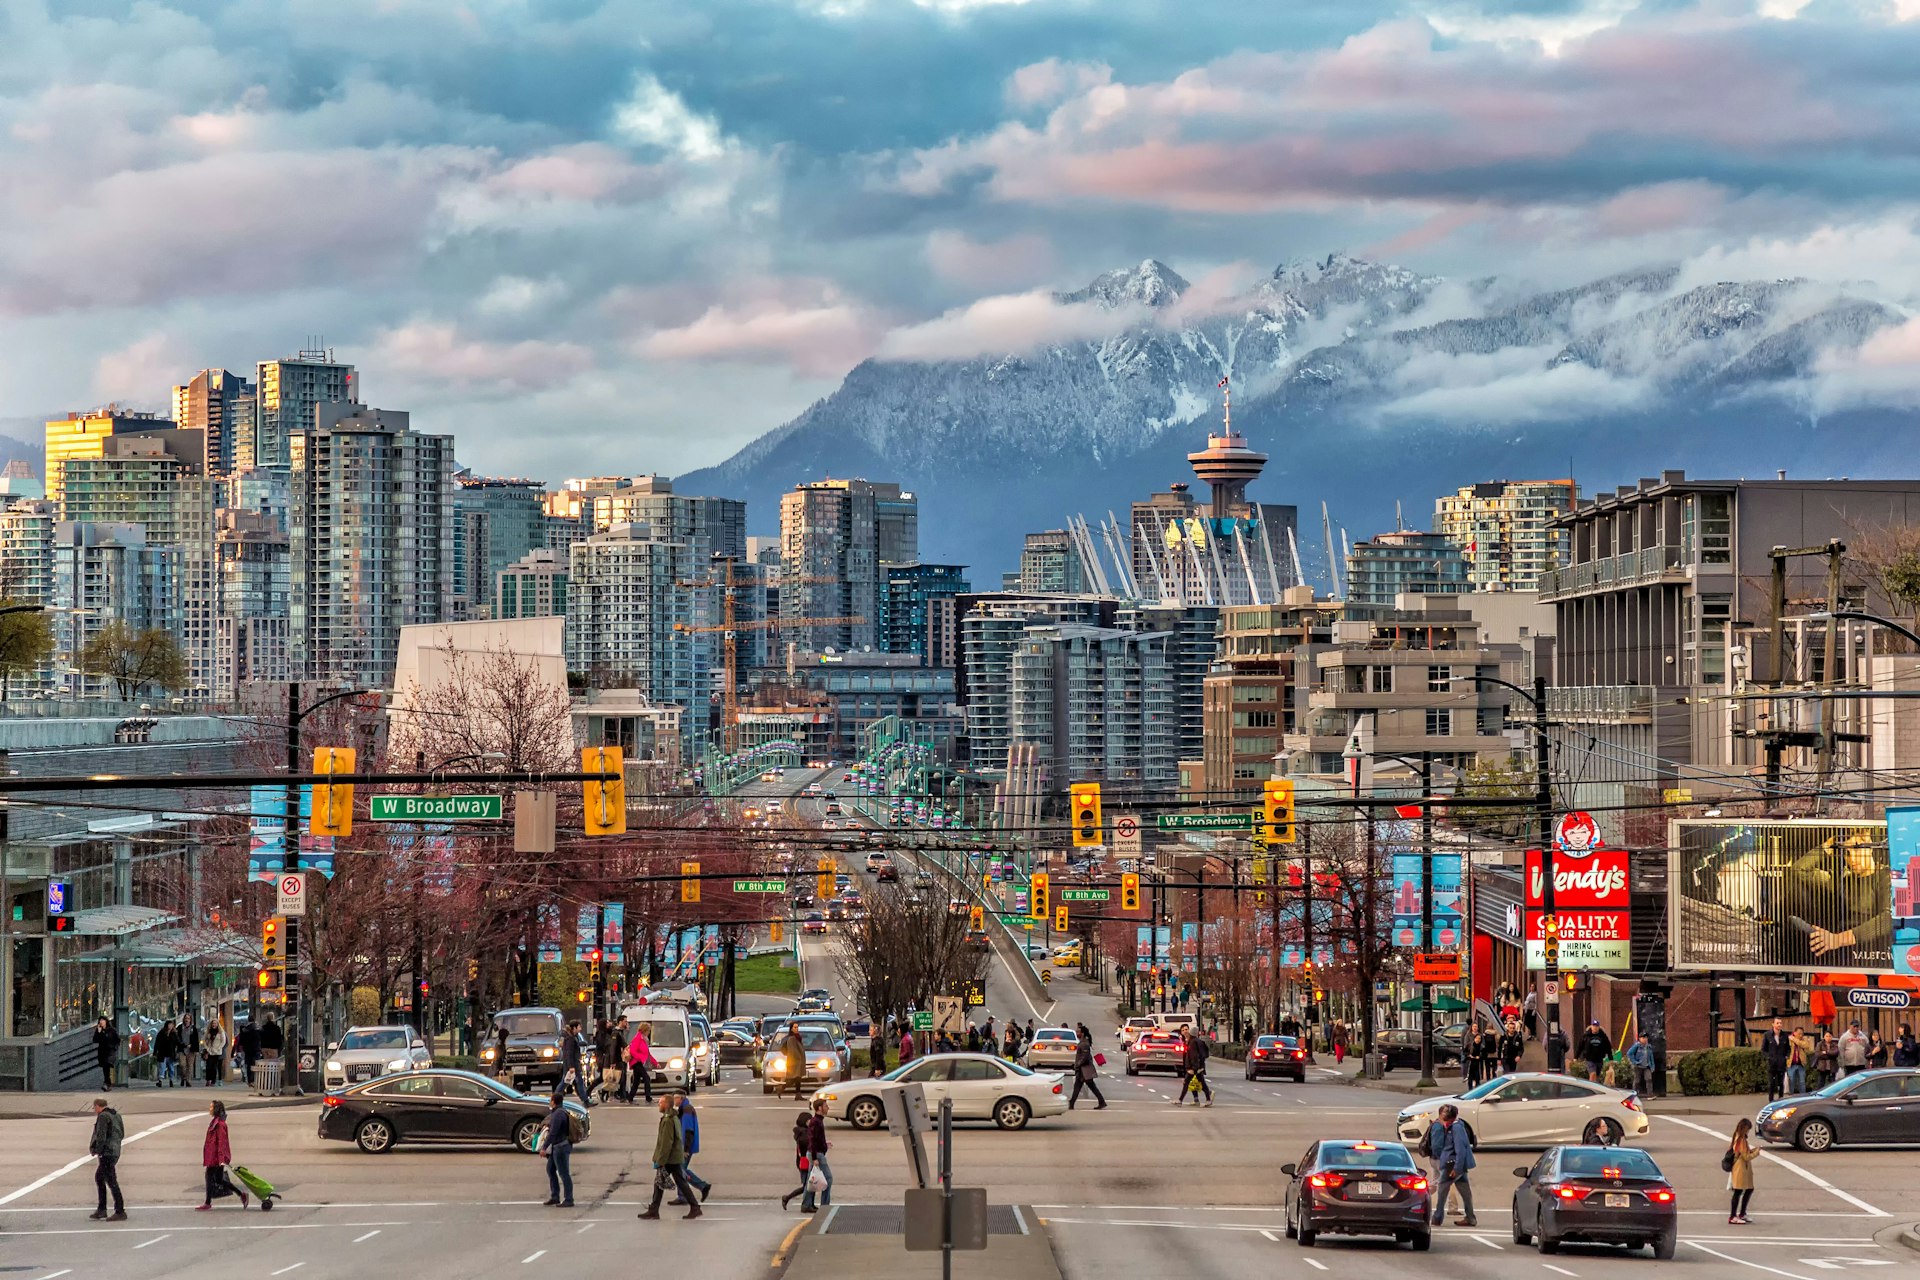 A crossing at Downtown Vancouver where cars wait at the traffic lights and people cross the road during the day with snow-capped mountains across the strait in the background.